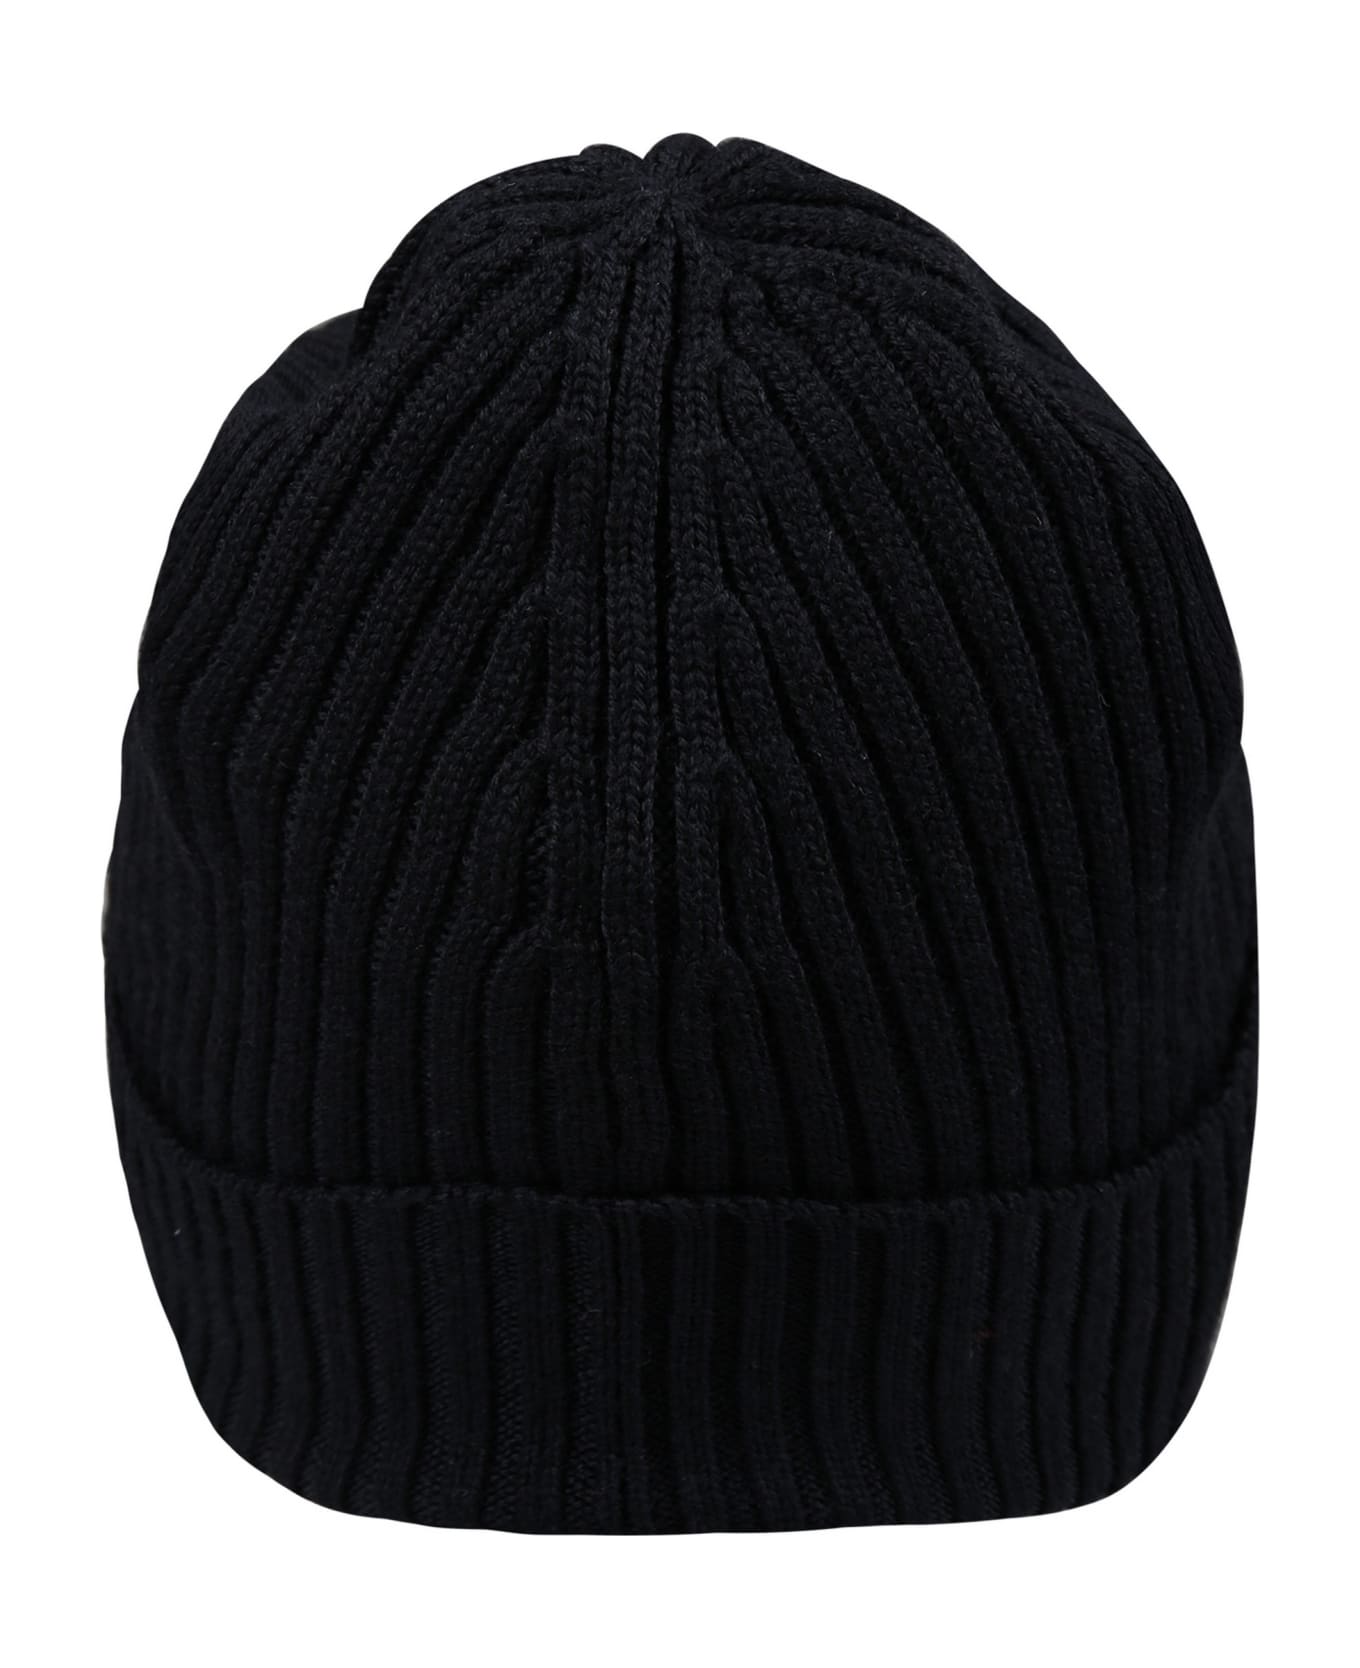 Lacoste Black Hat For Boy With Patch Of The Iconic Logo - Black